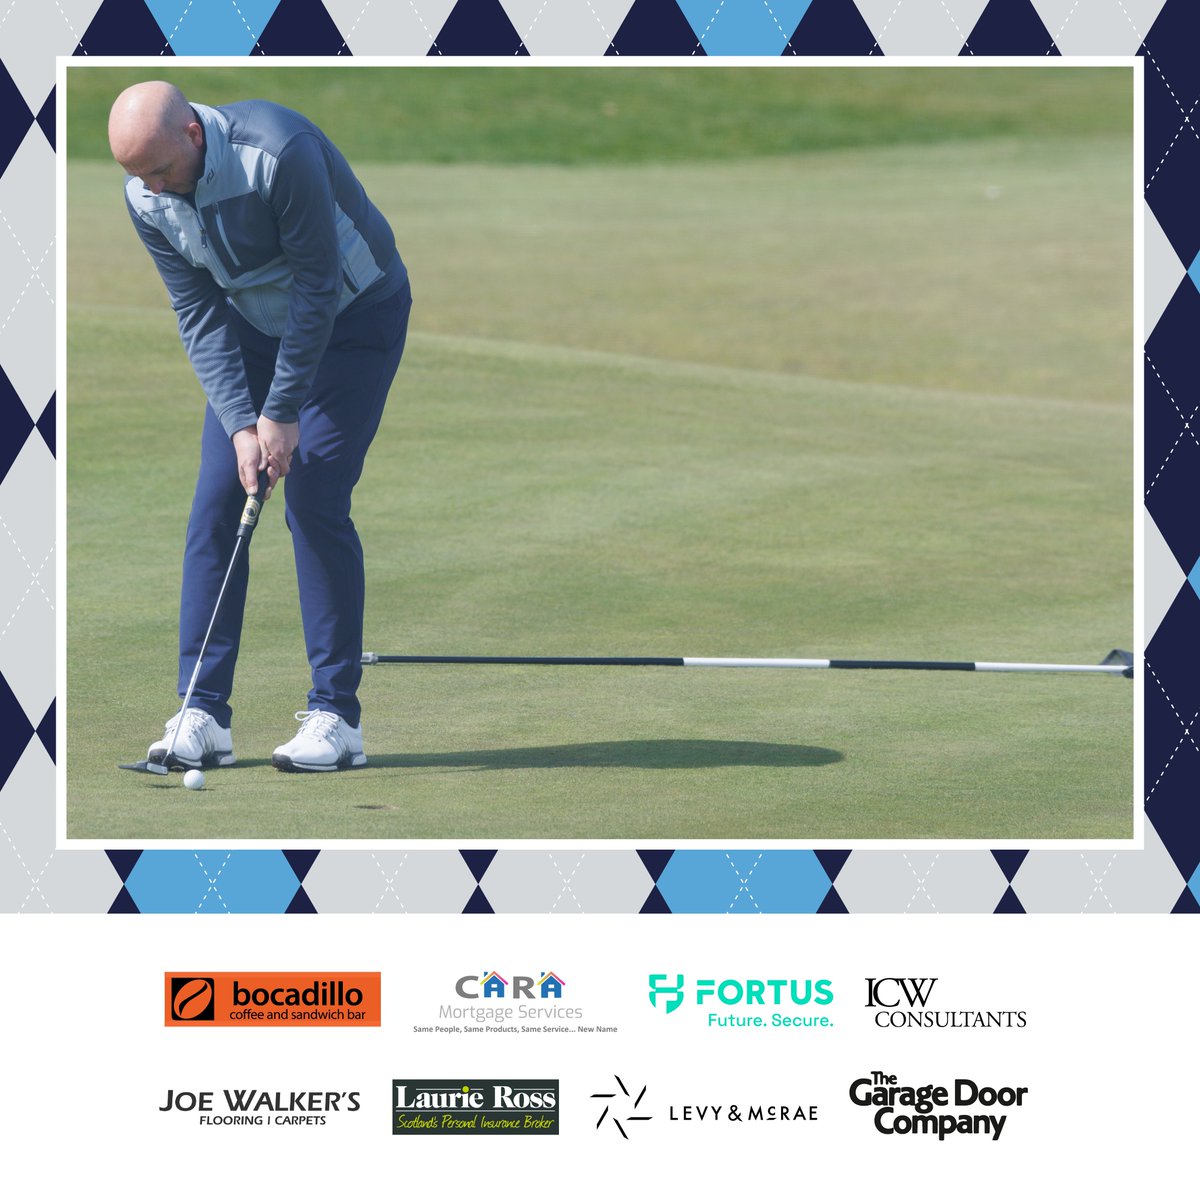 We hope you all had a great day out yesterday! Once again, we sincerely thank our sponsors, without you these events wouldn't be possible. As always, your support is greatly appreciated and never taken for granted. #krisboydcharity #kbgolfday2024